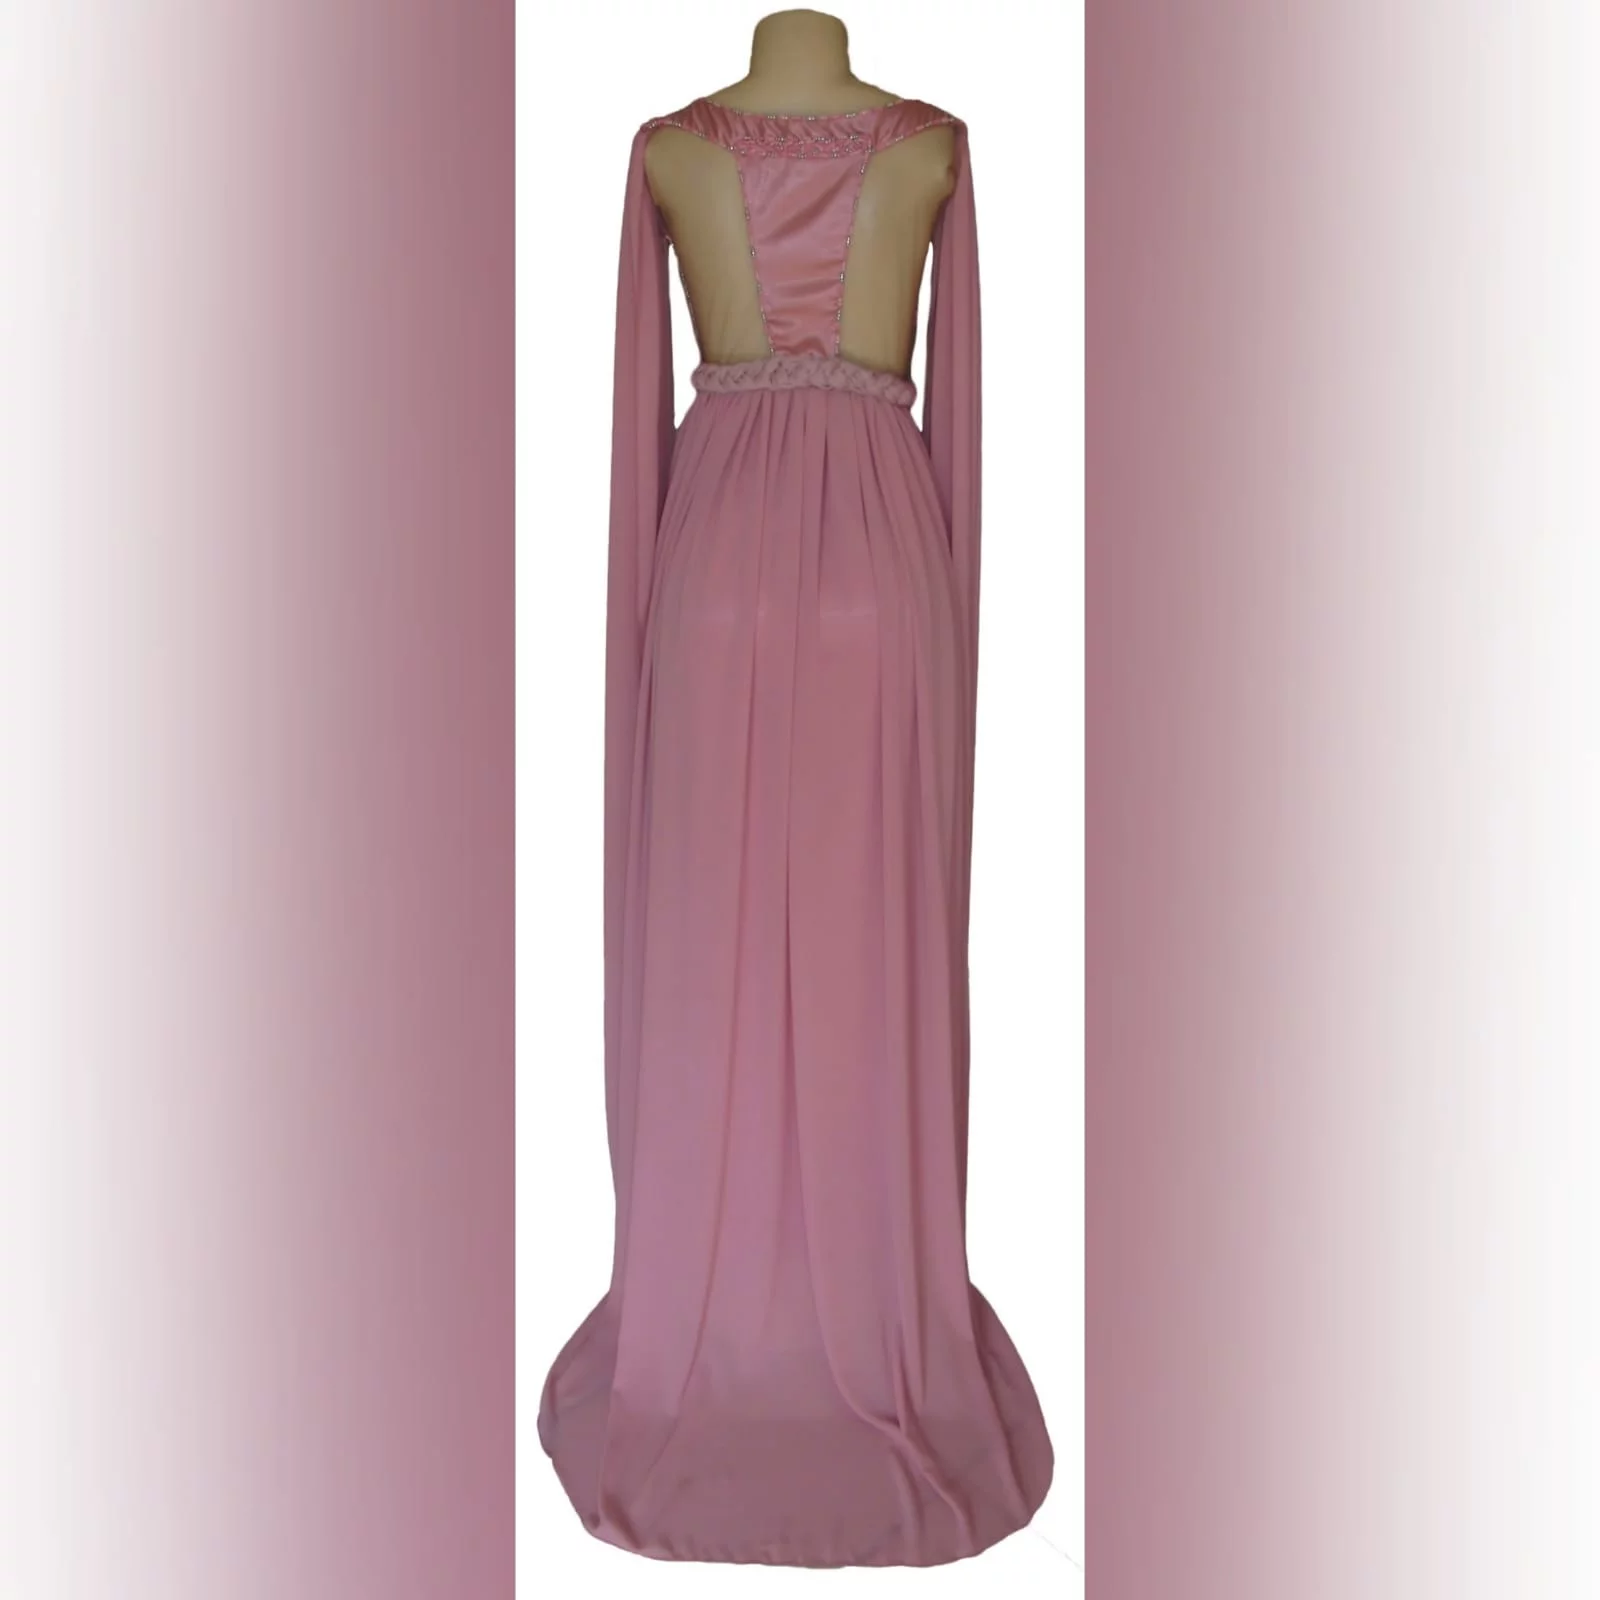 Dusty pink chiffon beaded prom dress 5 dusty pink chiffon beaded prom dress, bateau neckline effect with an illusion back, fully beaded bodice, plaited belt detail with a slit and a train. Shoulders with chiffon draping creating a goddess look.